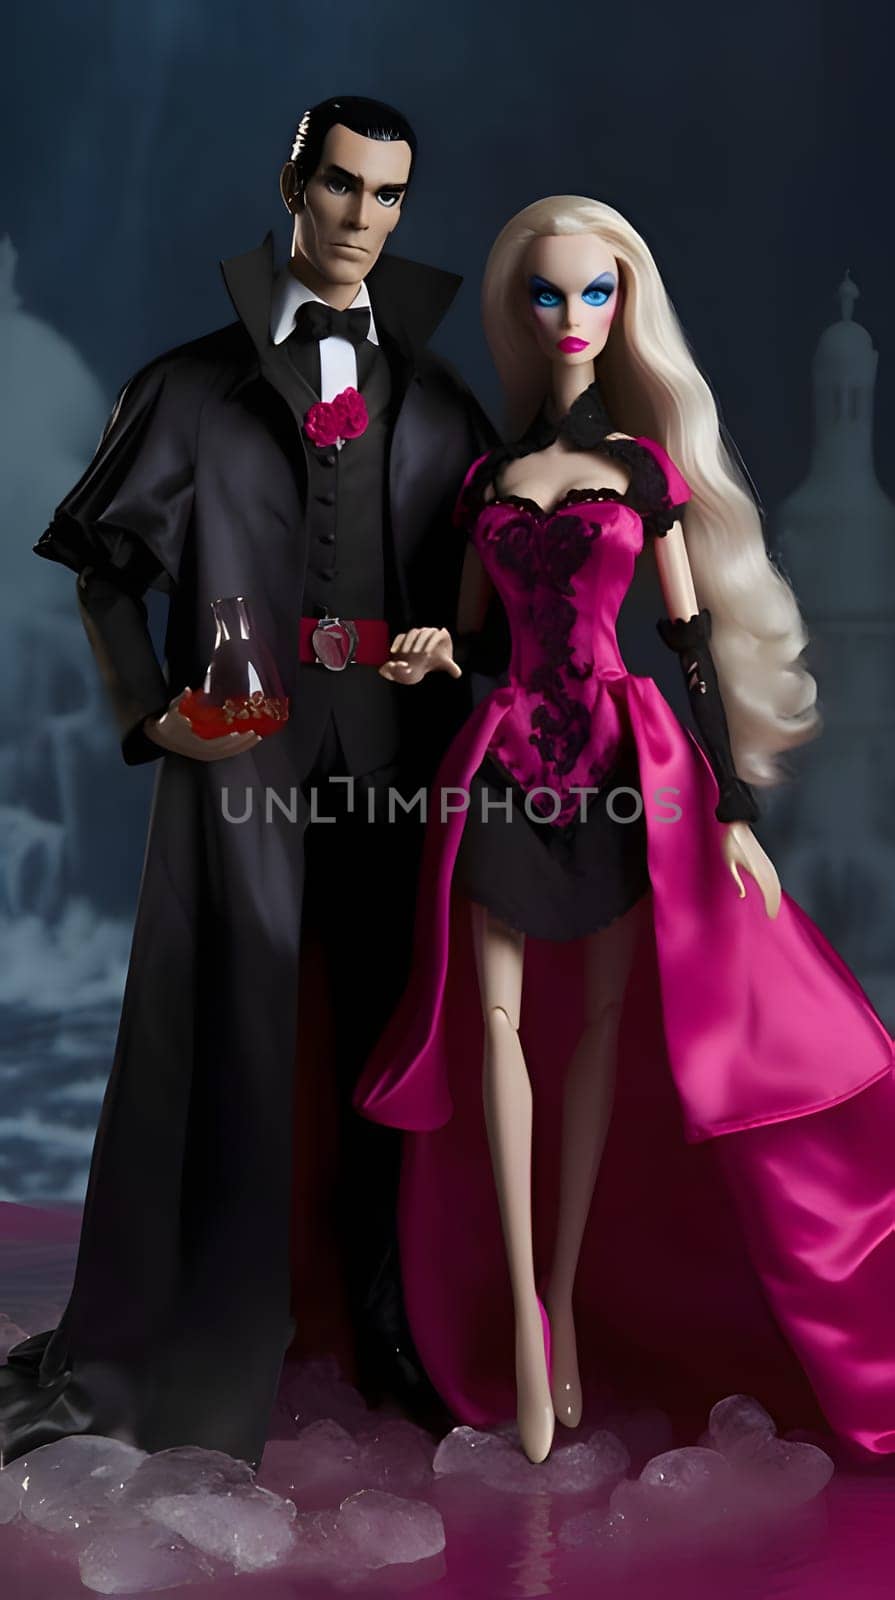 Dark Barbie, clad in a stylish black and pink ensemble, stands alongside a mysterious vampire adorned in a black suit and coat.